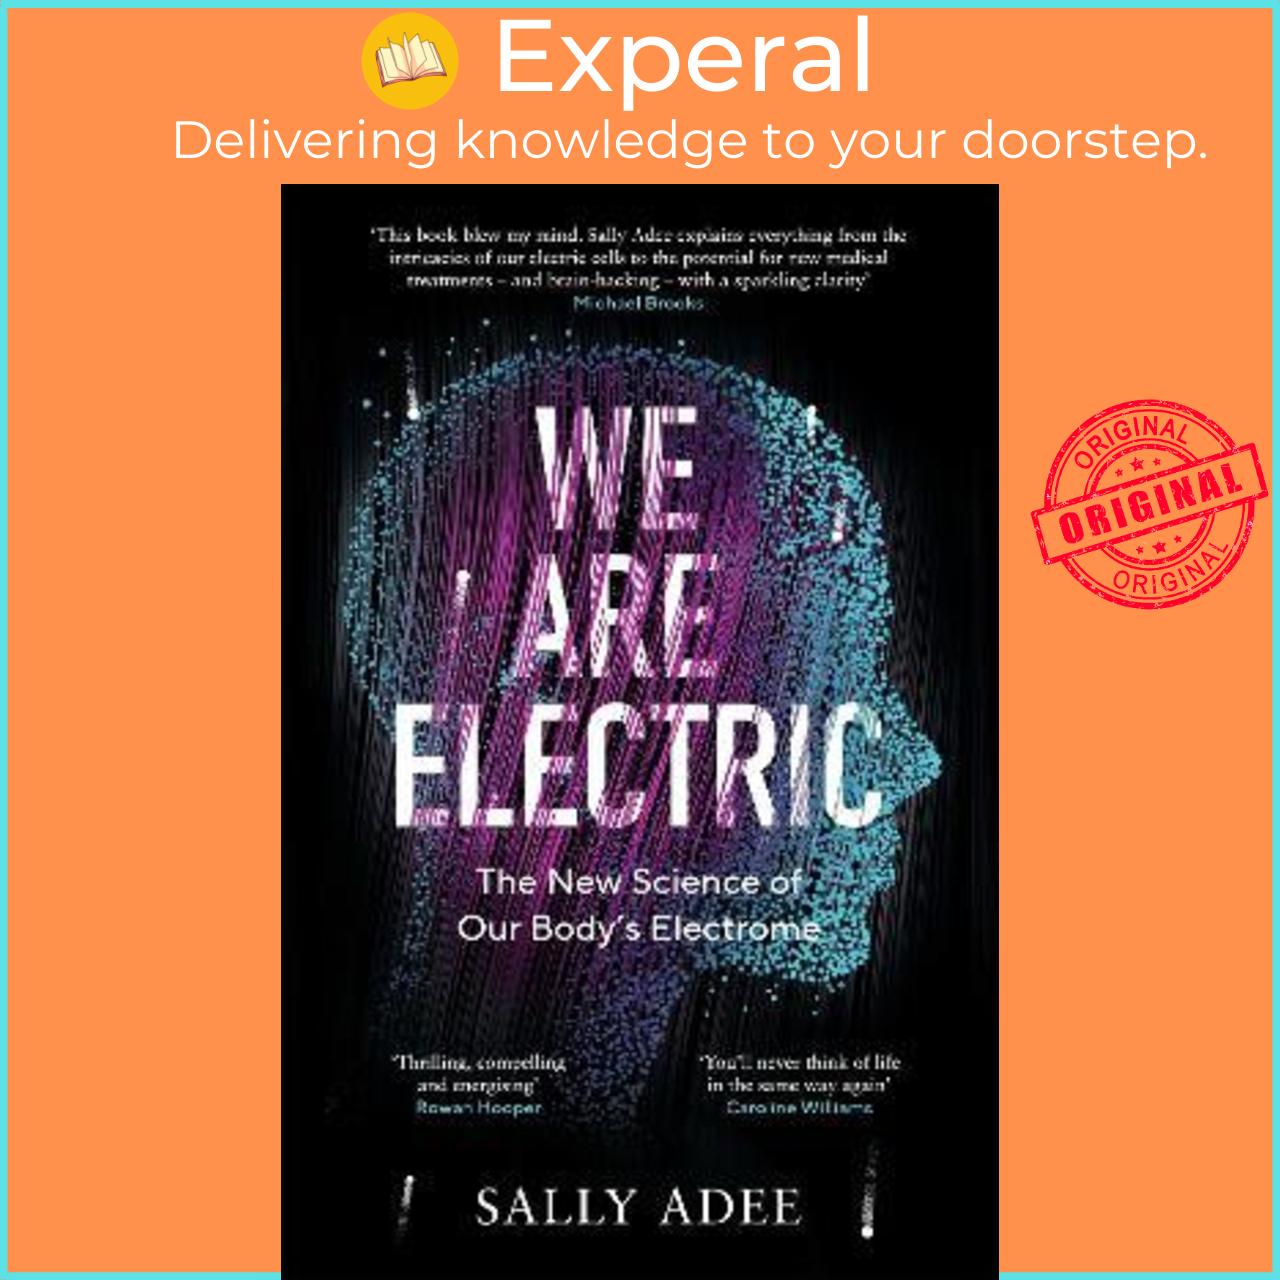 Sách - We Are Electric : The New Science of Our Body's Electrome by Sally Adee (UK edition, hardcover)